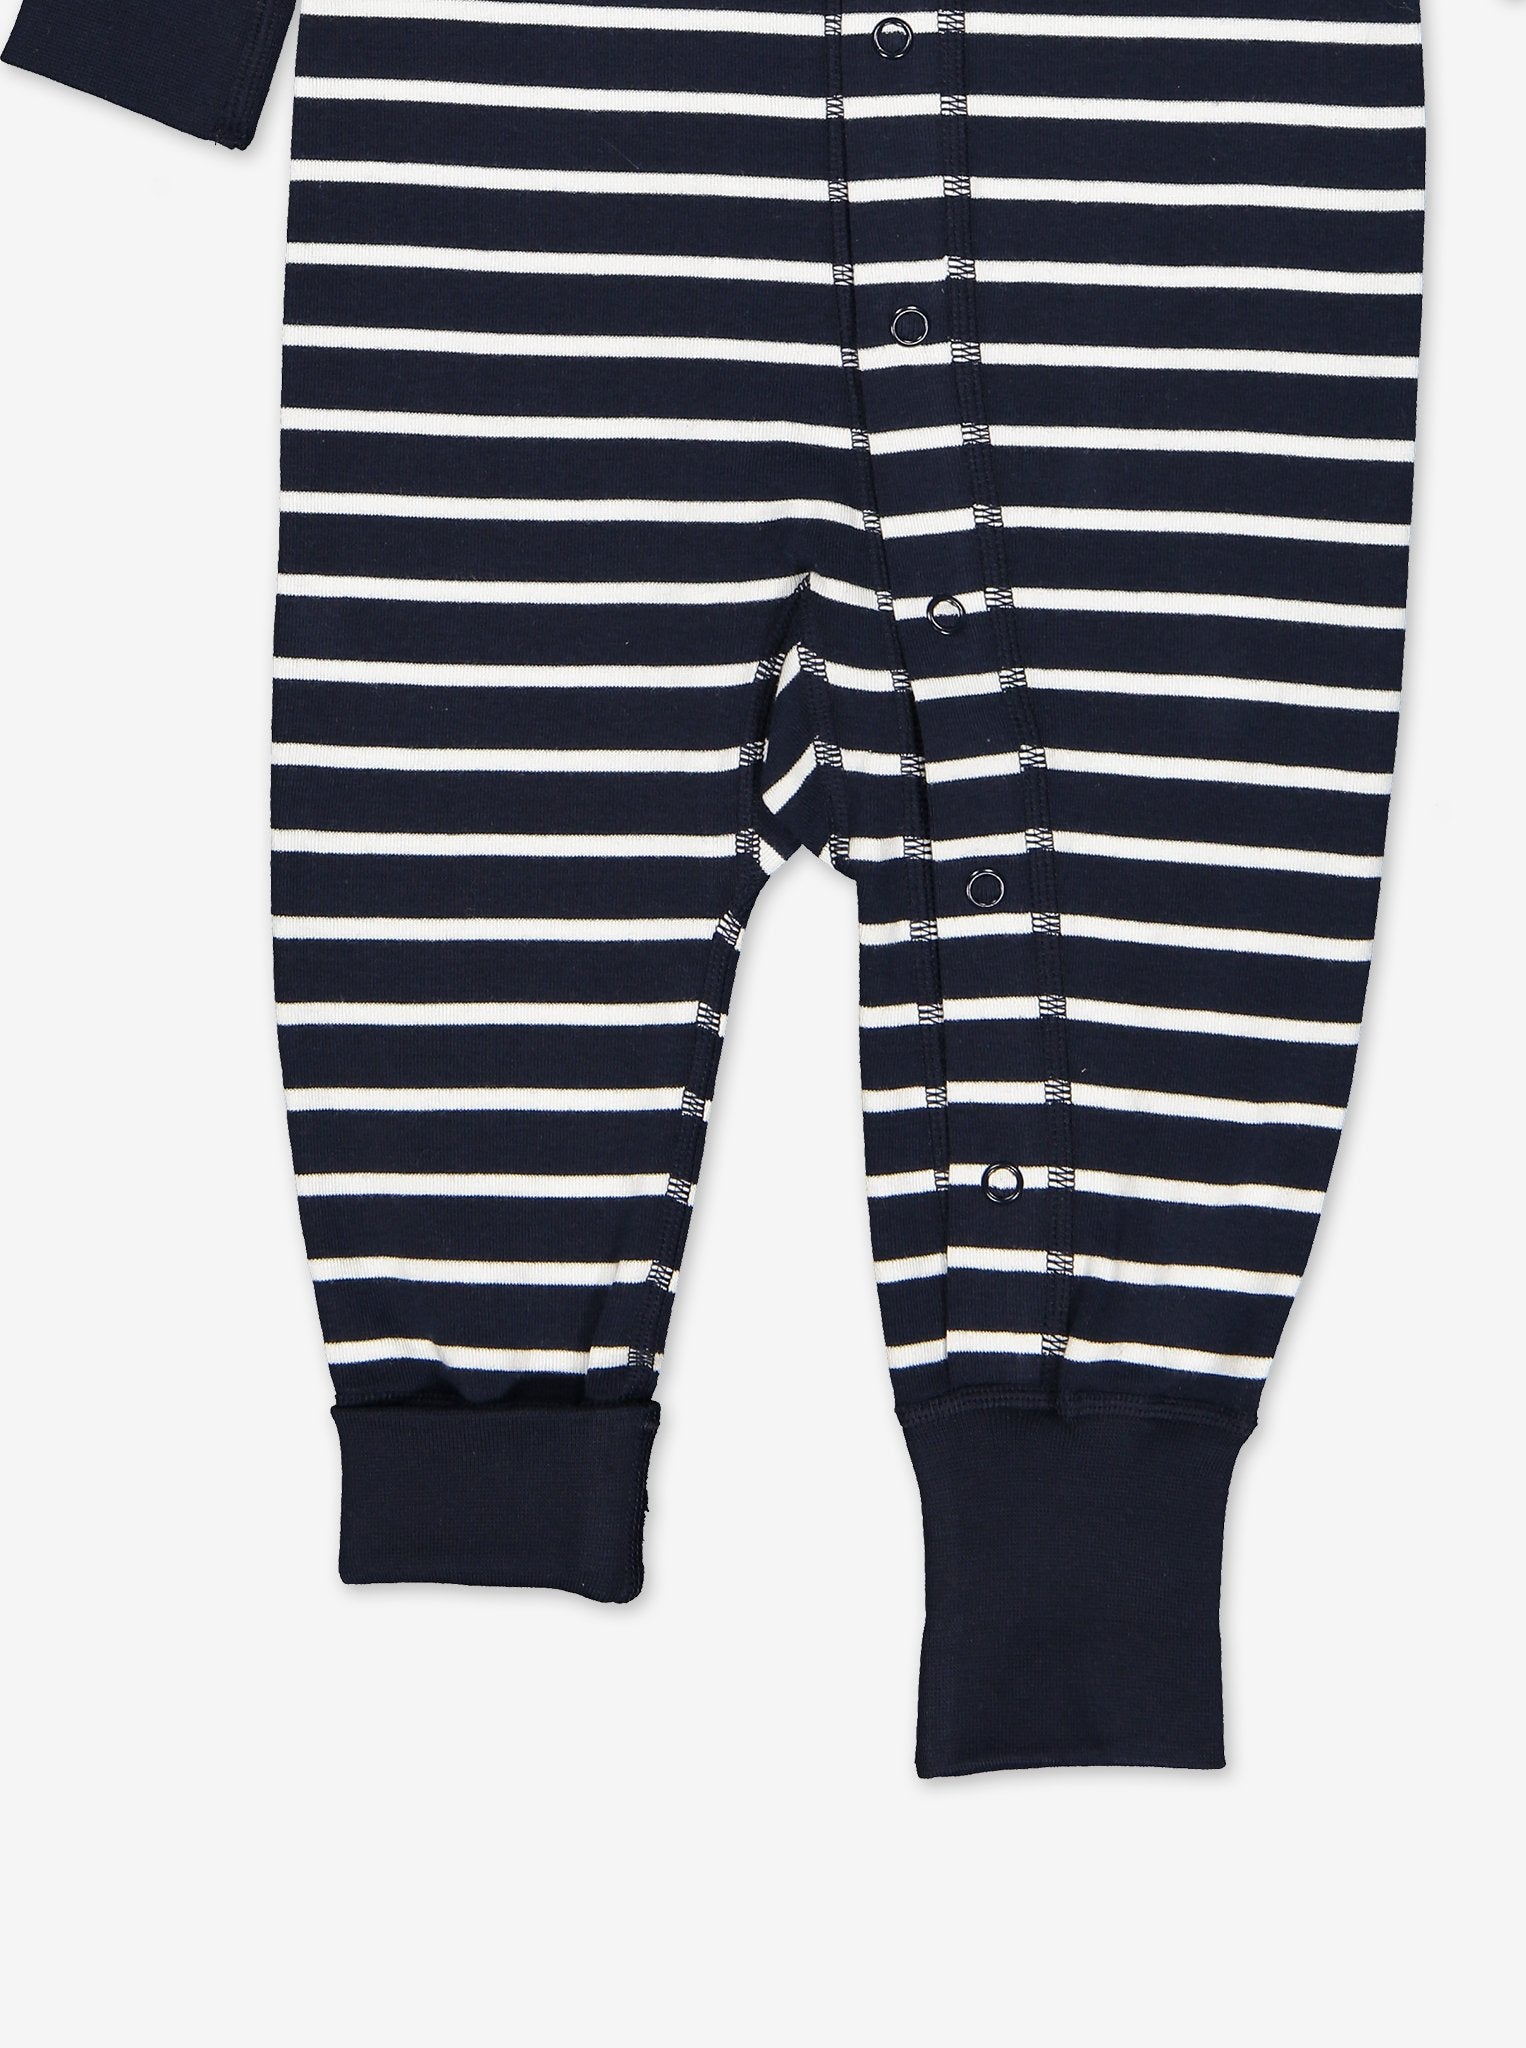 navy blue and white stripes baby all in one, ethical organic cotton, polarn o. pyret quality